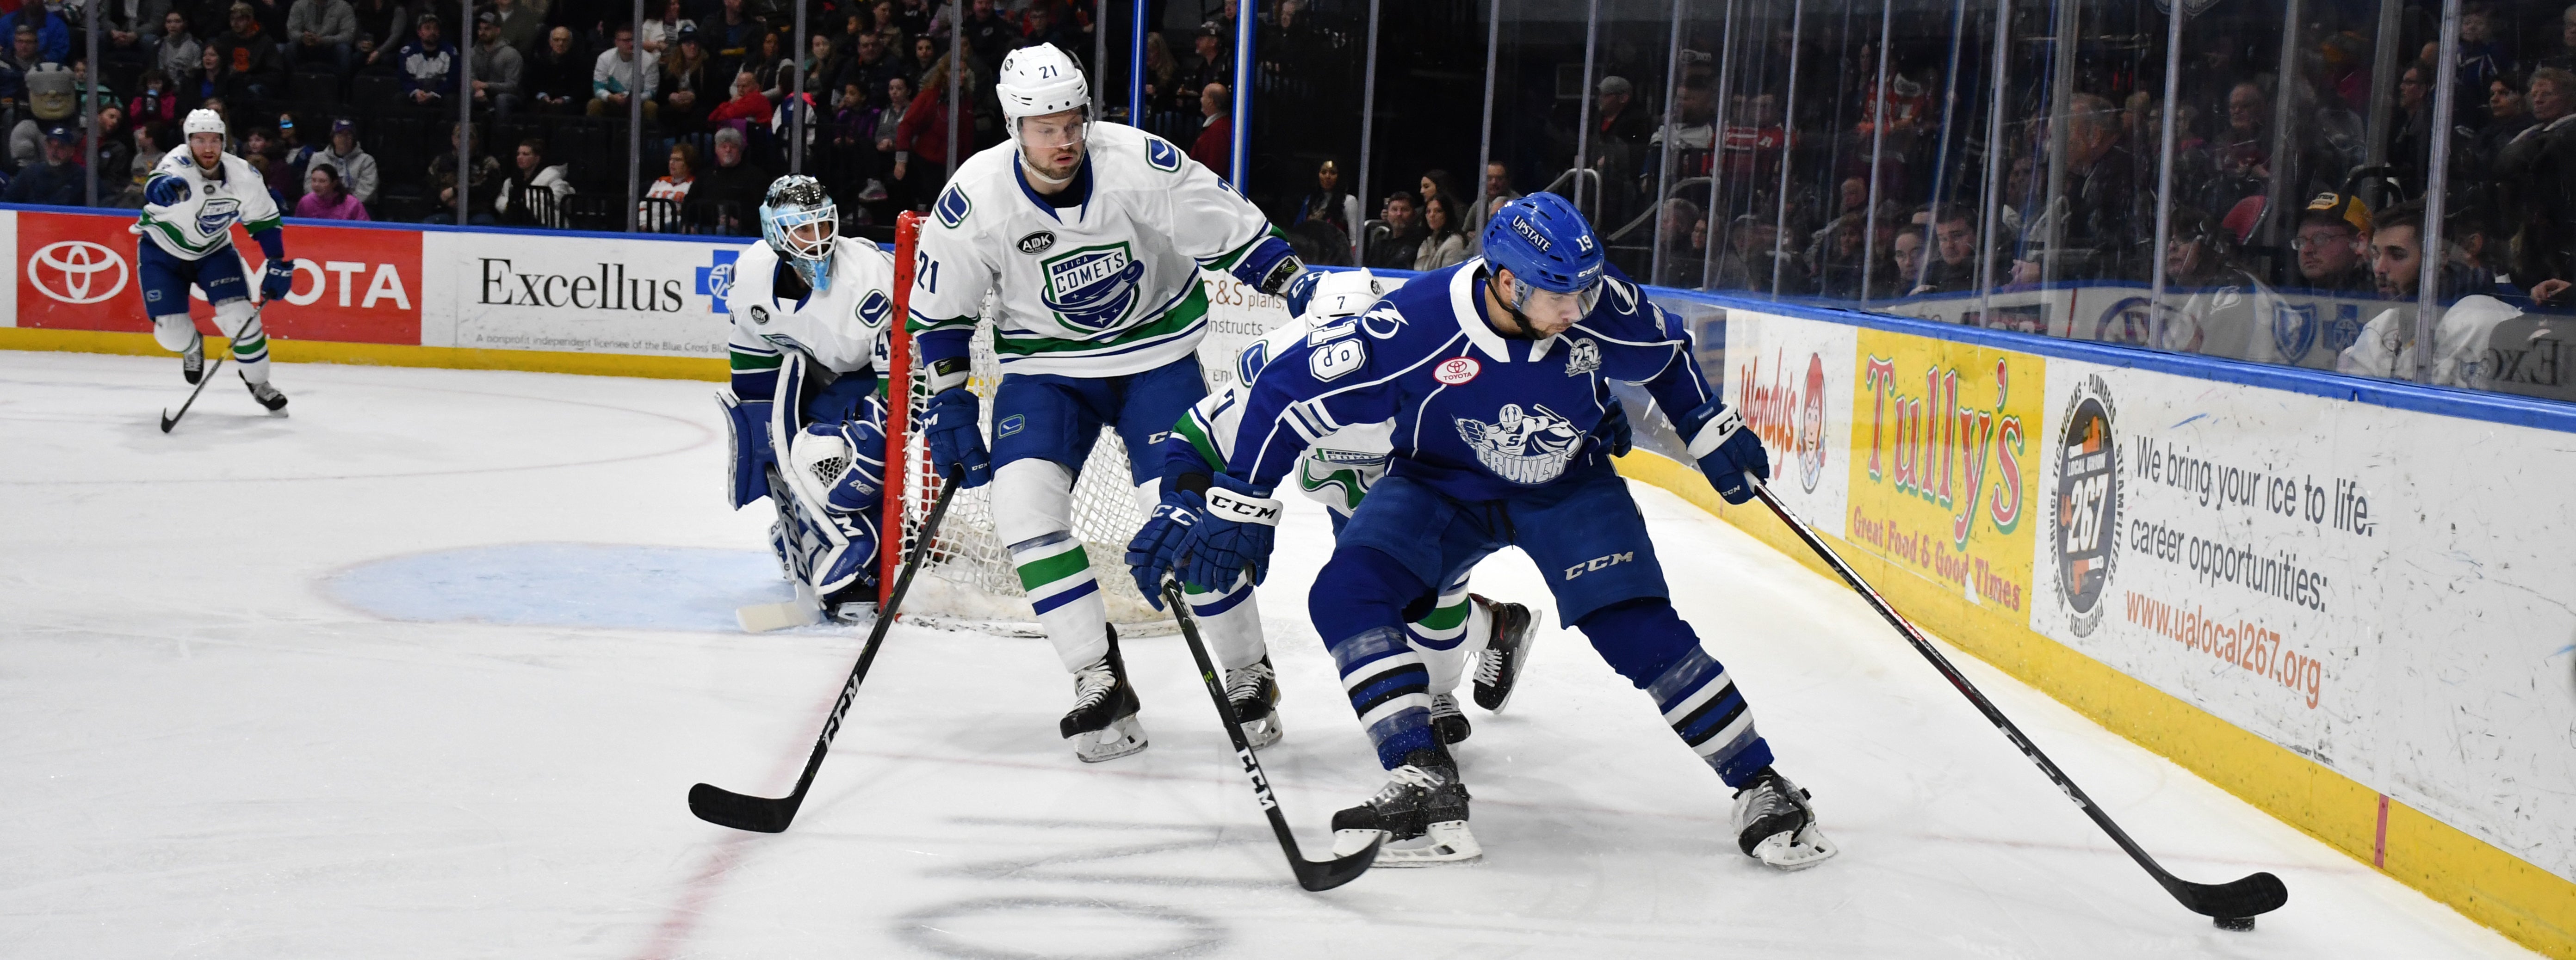 COMETS STUMBLE IN LOSS TO SYRACUSE